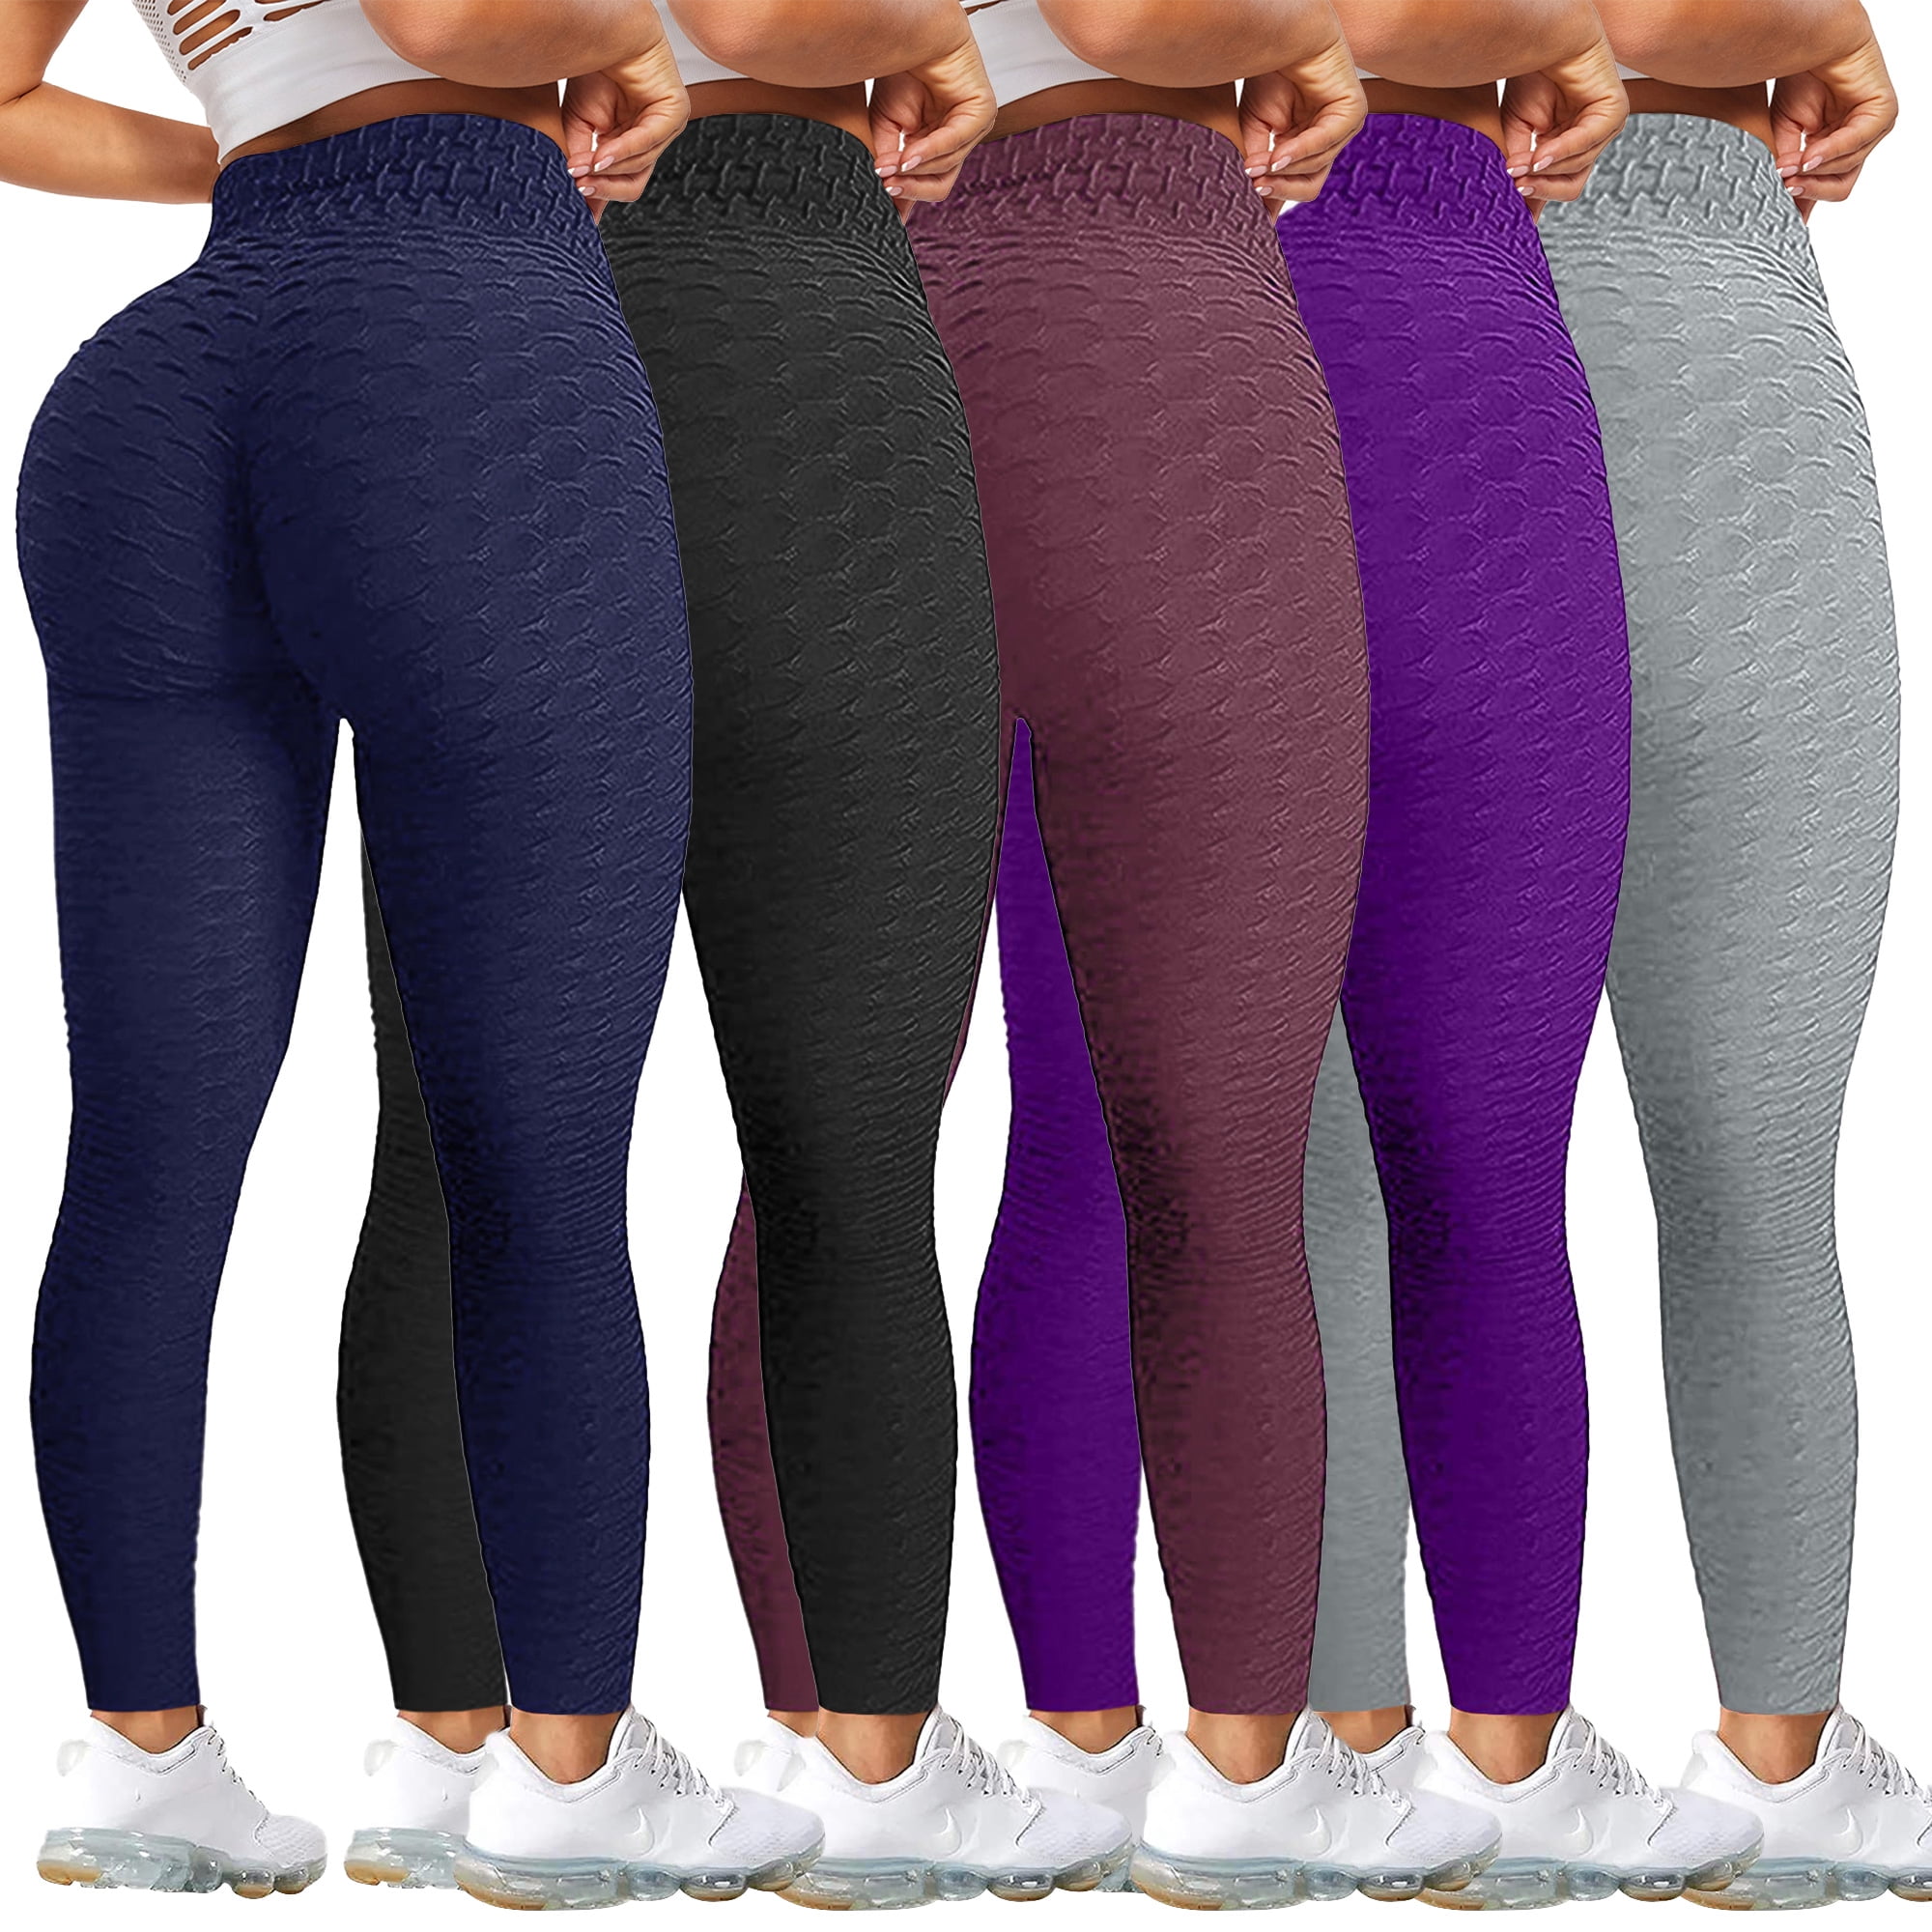 Comvin Women's Leggings High Waisted Yoga Pants with Pocket, Soft Tummy  Control Workout Leggings, L 